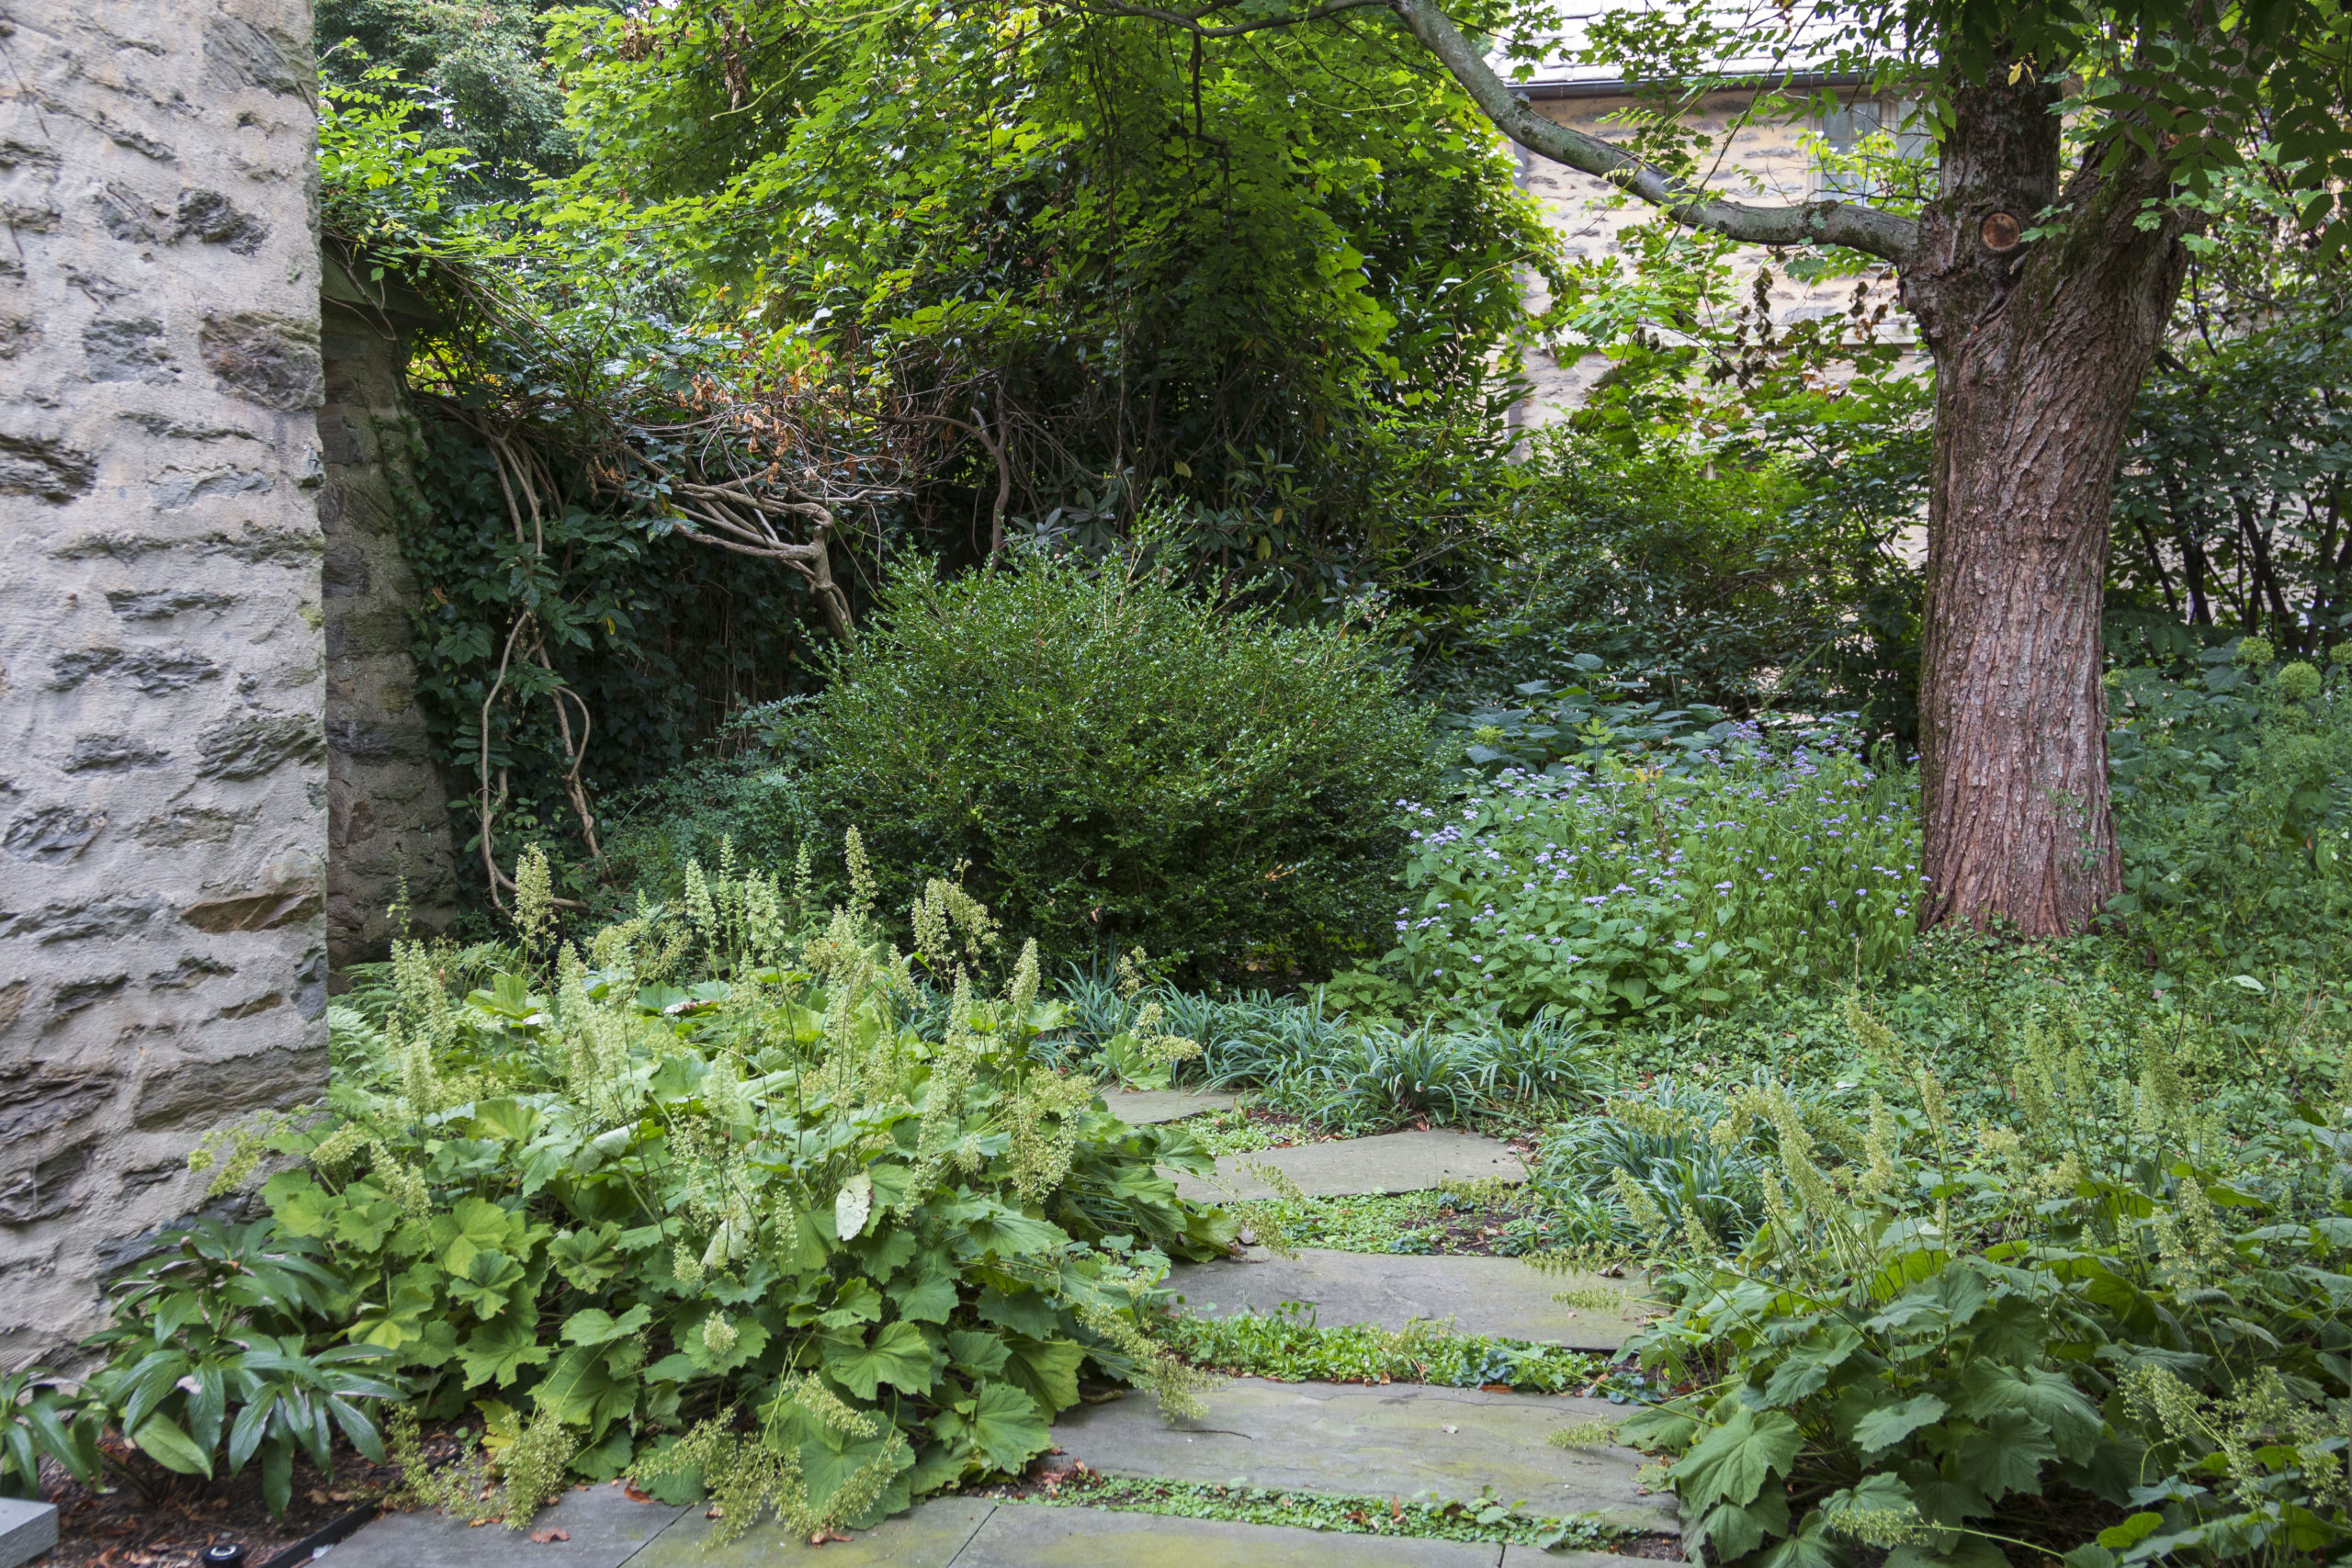 A stepstone path leads past lush woodland plantings over coral bells, ageratum, and native sedges.